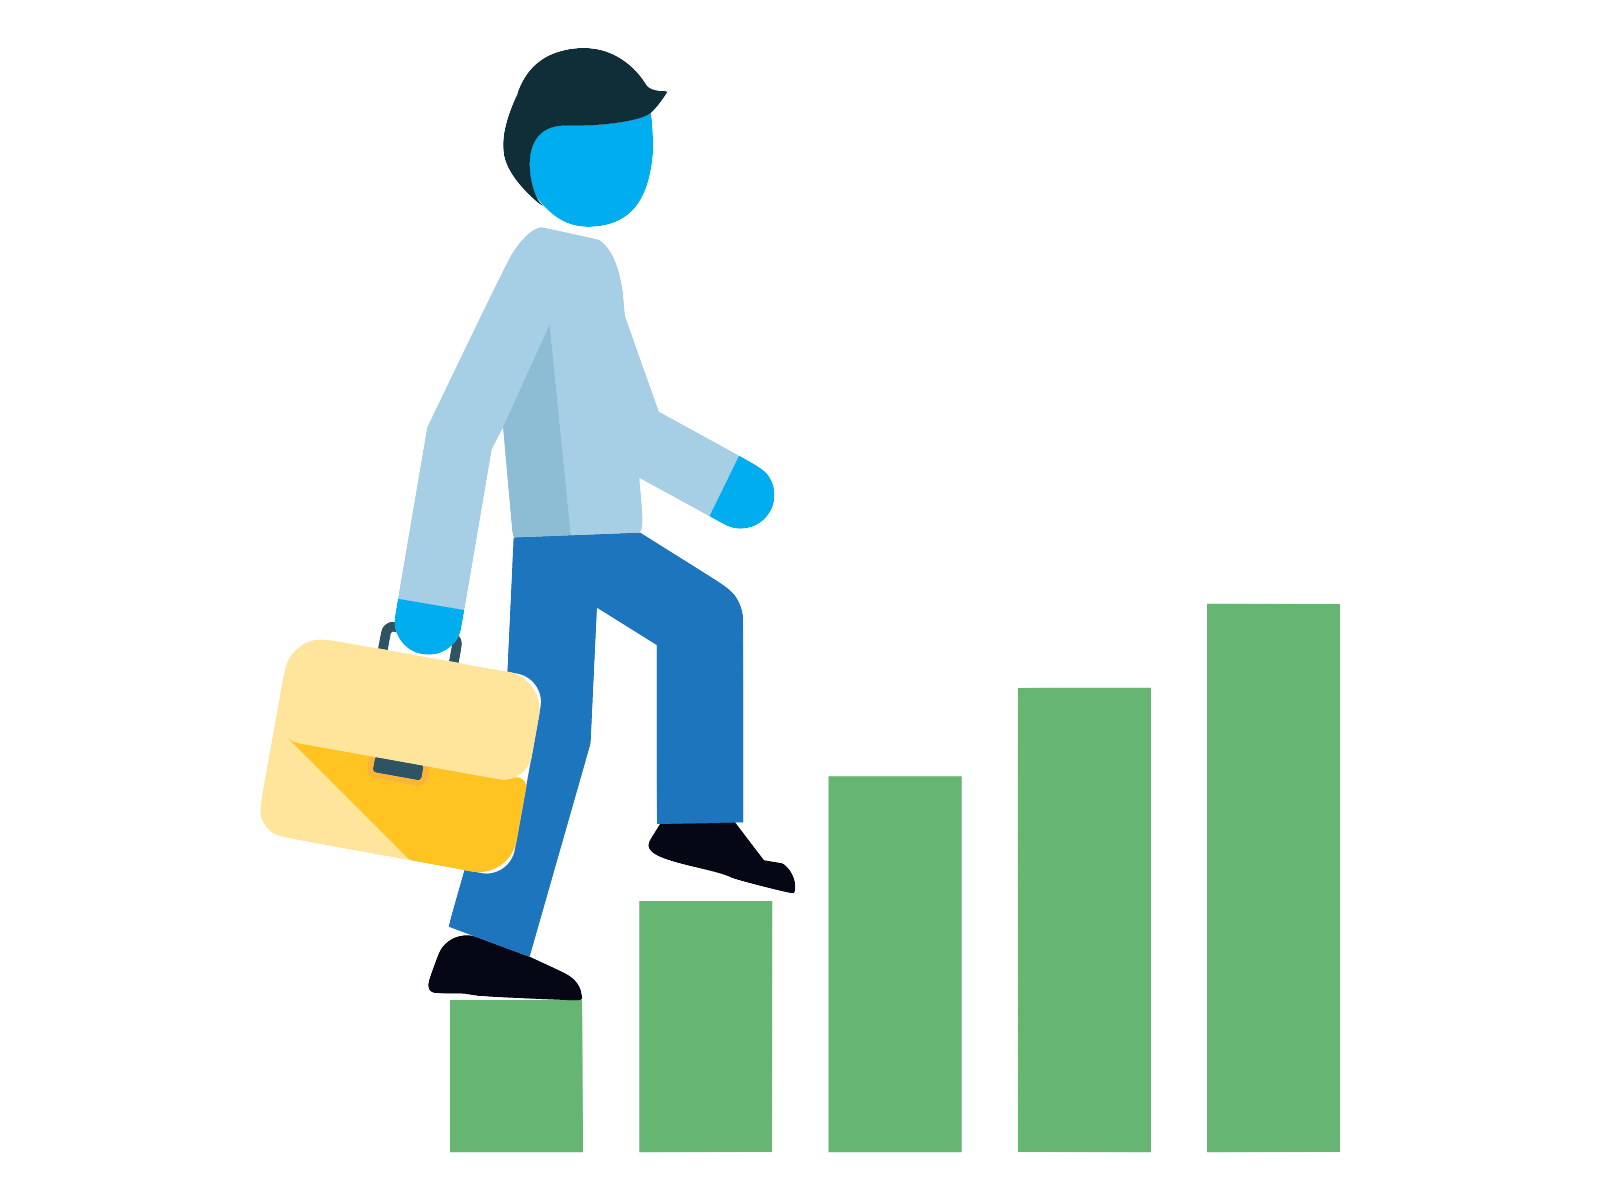 Illustration of a person climbing a bar chart, representing working towards success